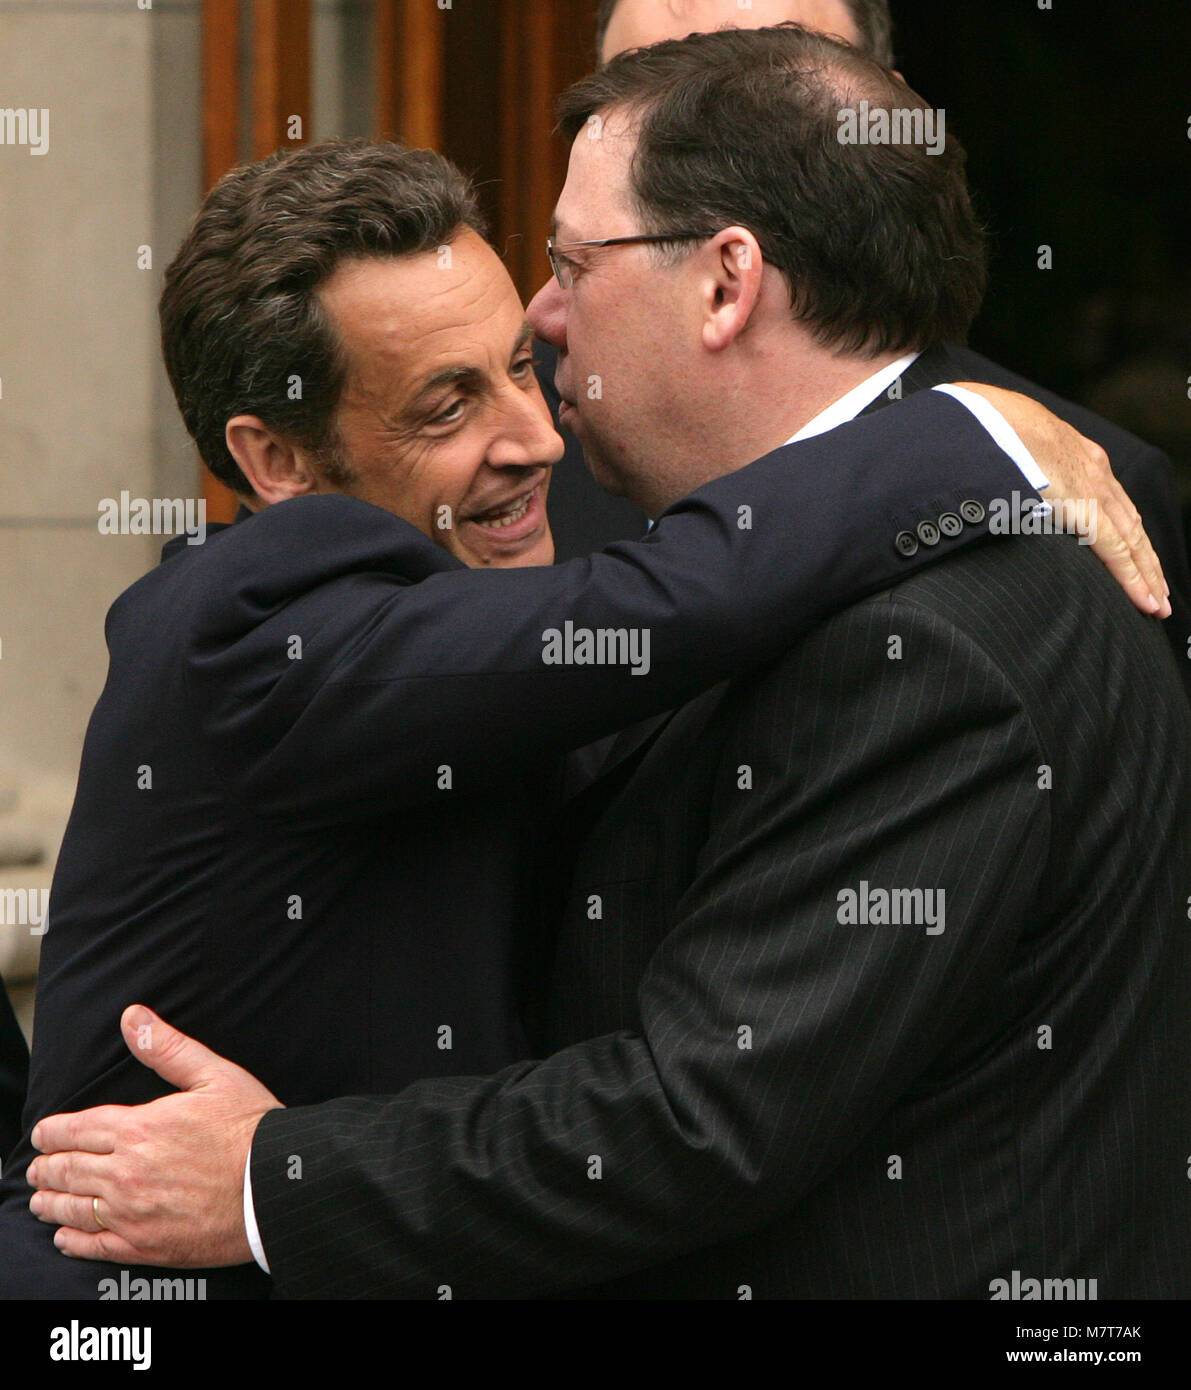 French President Nicolas Sarkozy hungs Taoiseach Brian Cowen after his day long visit to Government Buildings in Dublin, Monday 21, July 2008. Sarkozy met the two main opposition leaders - Fine Gael's Enda Kenny,  Labour's Eamon Gilmore and talks with groups who opposed and supported the Lisbon Treaty. Photo/Paul McErlane Stock Photo